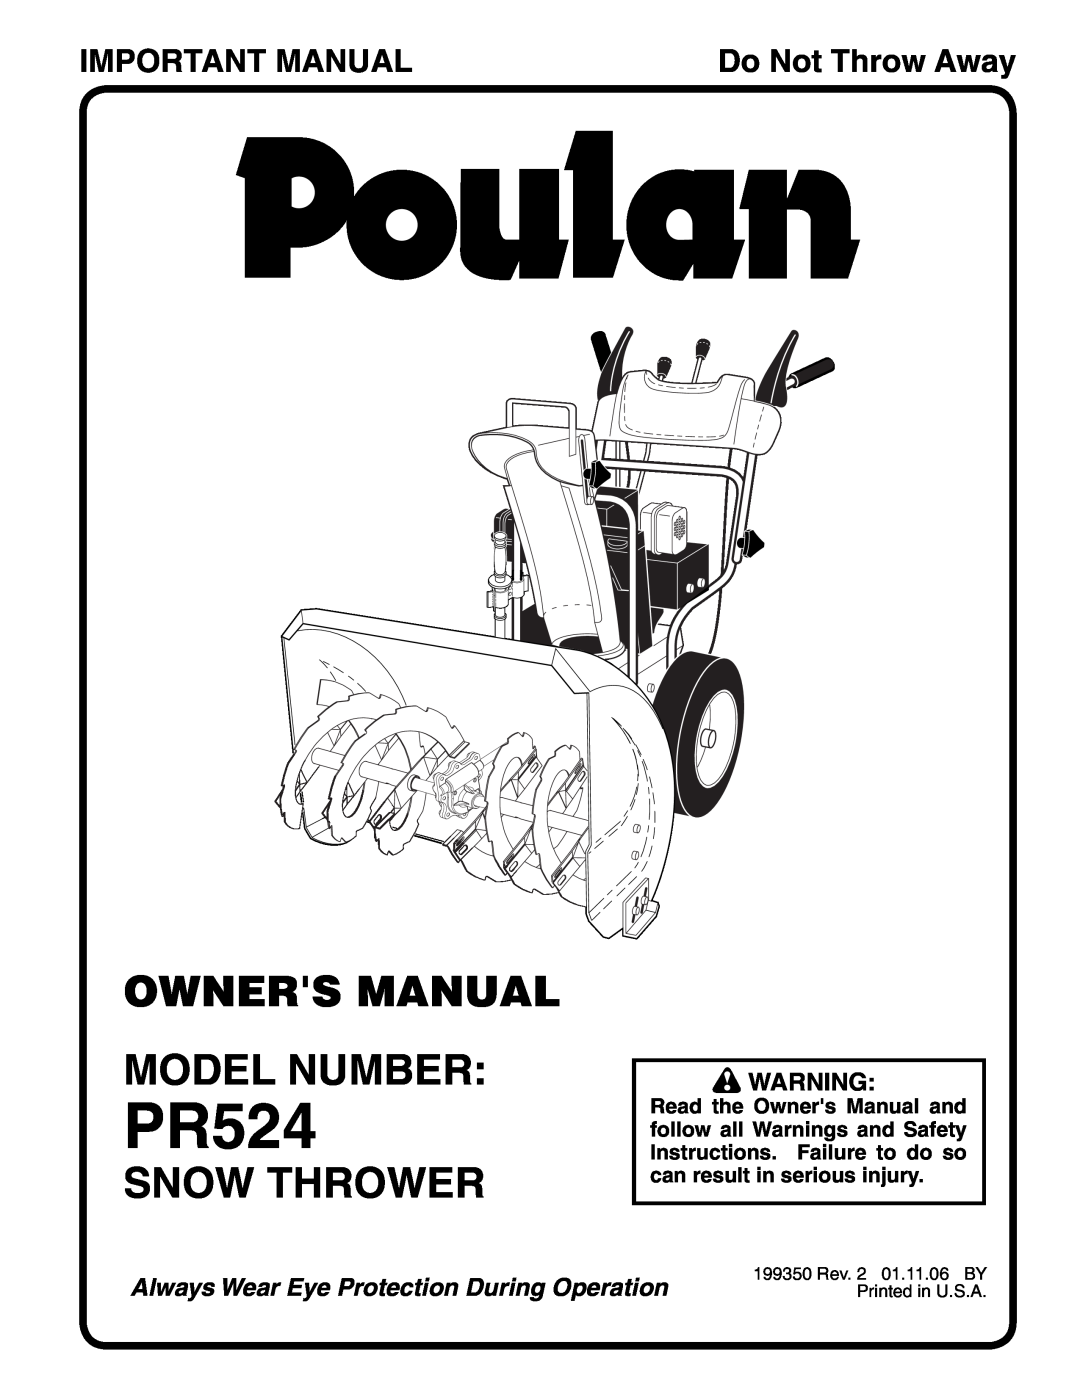 Poulan 199350 owner manual Owners Manual Model Number, Snow Thrower, Important Manual, PR524, Do Not Throw Away 